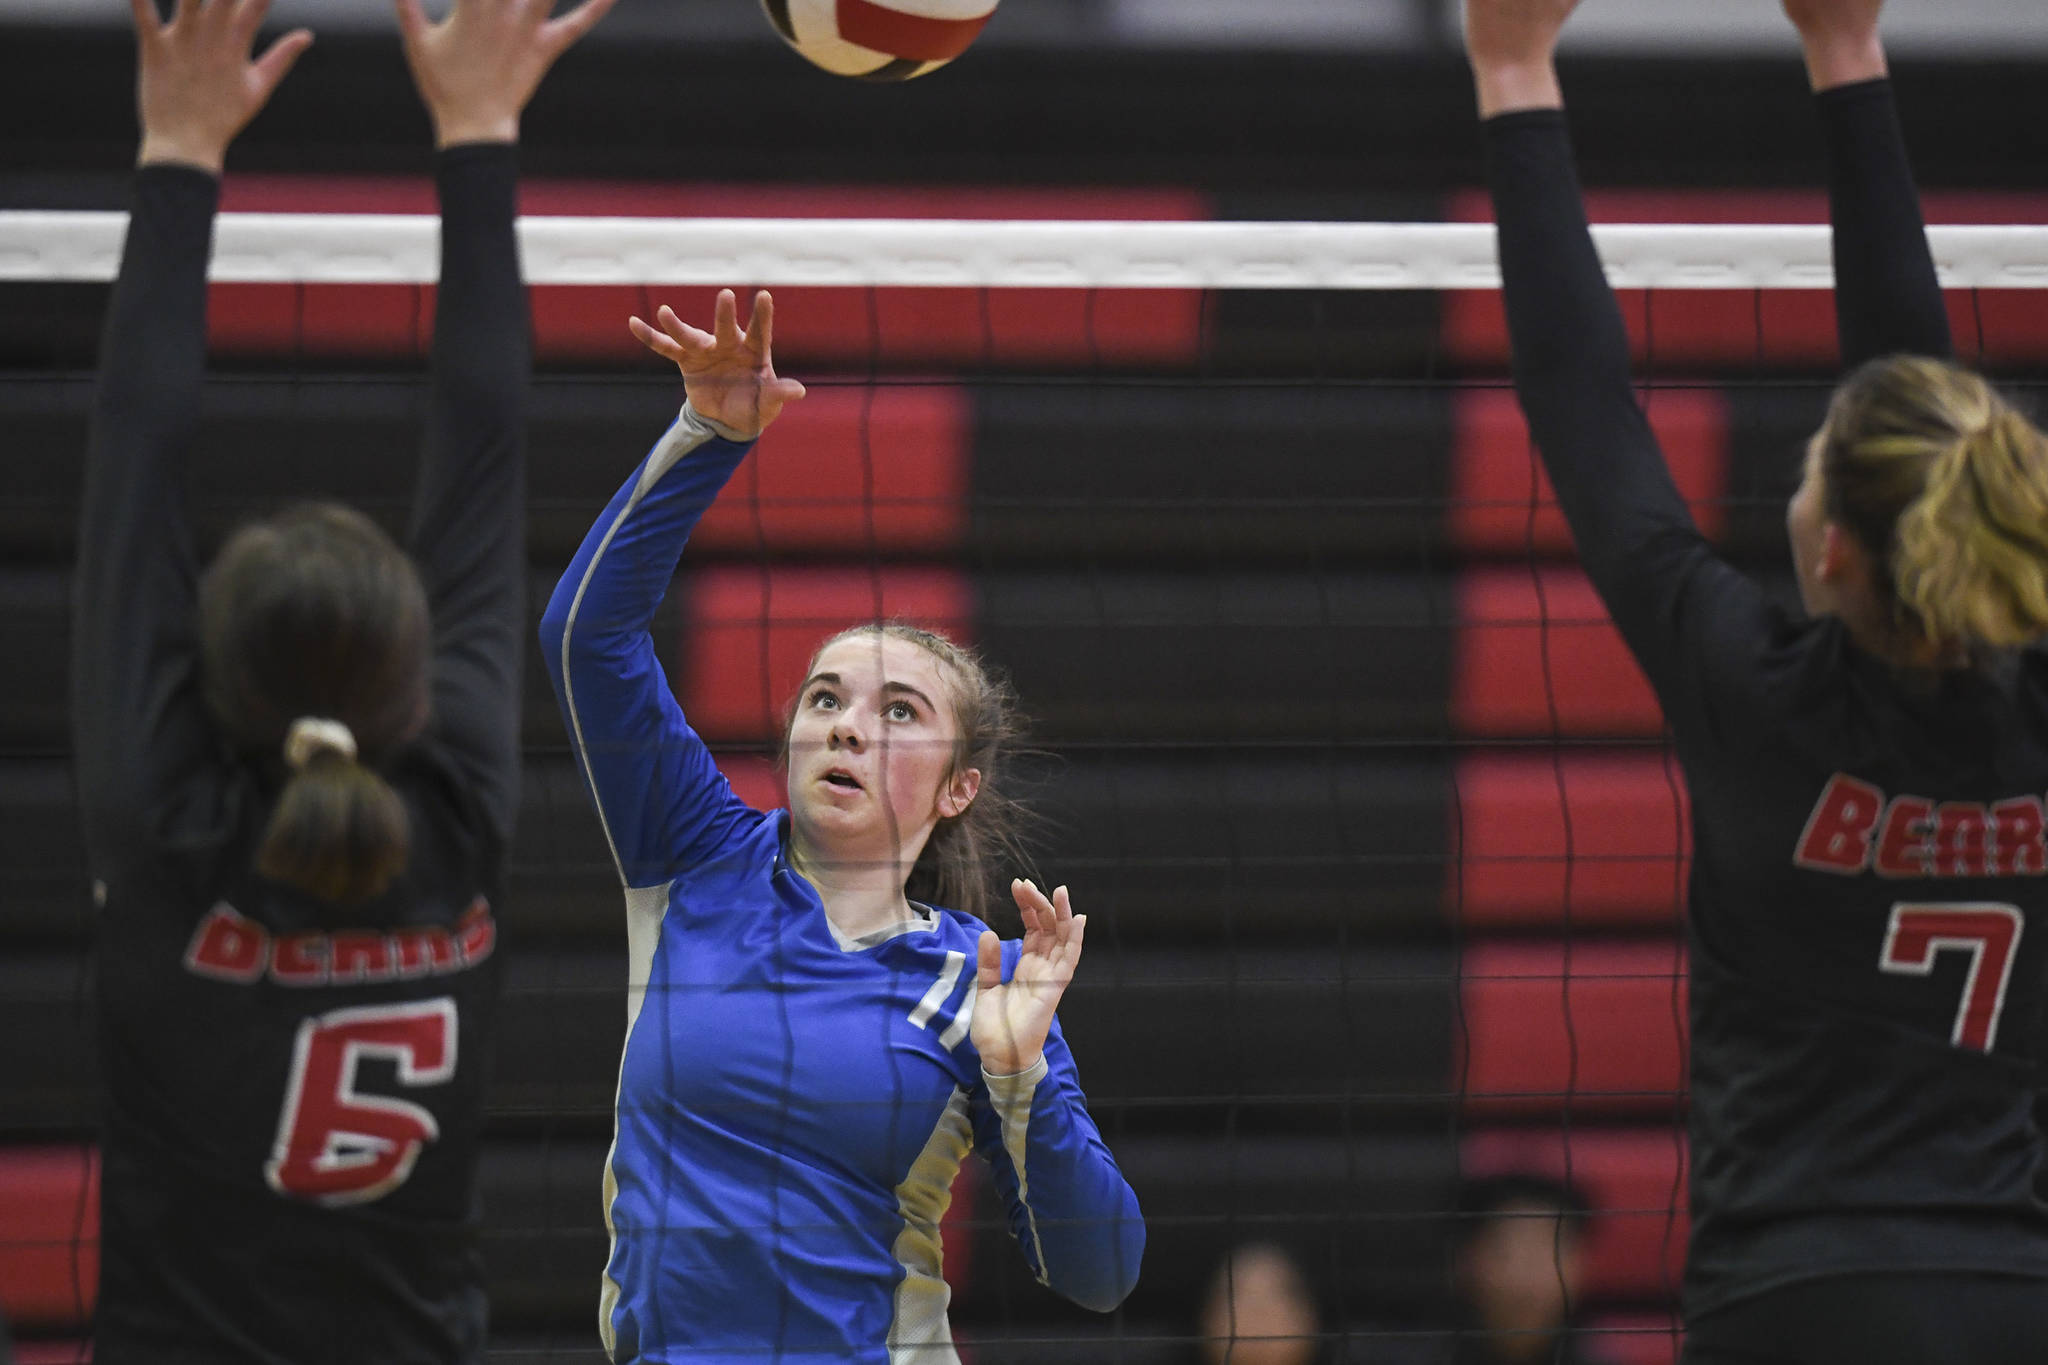 Thunder Mountain’s Sam Dilley, center, spikes the ball against Juneau-Douglas’ Addie Prussing, left, and Jojo Griggs at the Volleyball Jamboree at Juneau-Douglas High School: Yadaa.at Kalé on Friday, Aug. 30, 2019. (Michael Penn | Juneau Empire)